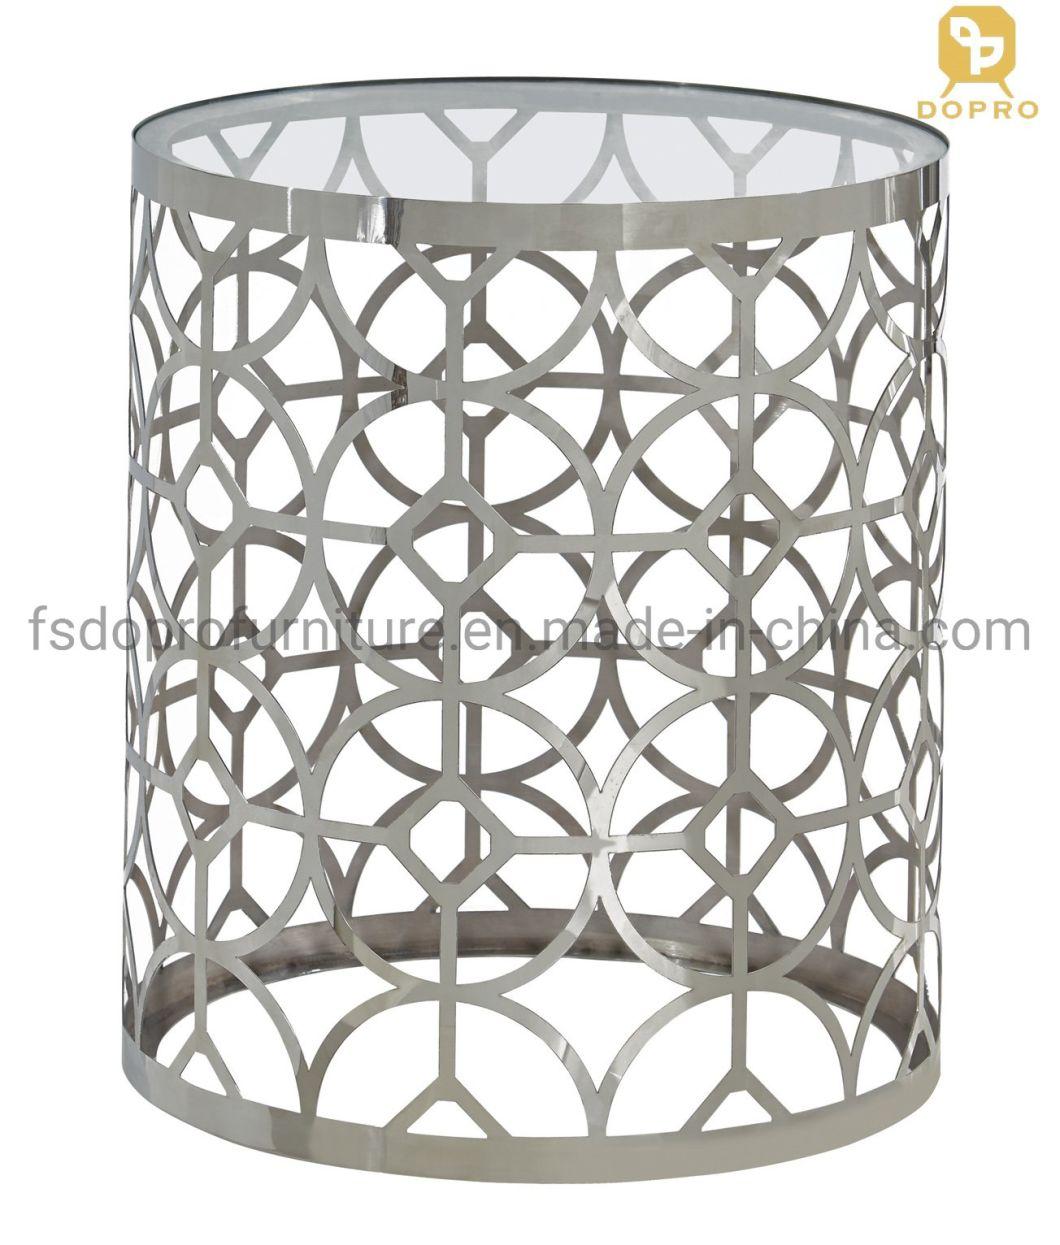 Modern Laser Luxury Living Room Furniture Gold End Table Side Table-Fa07